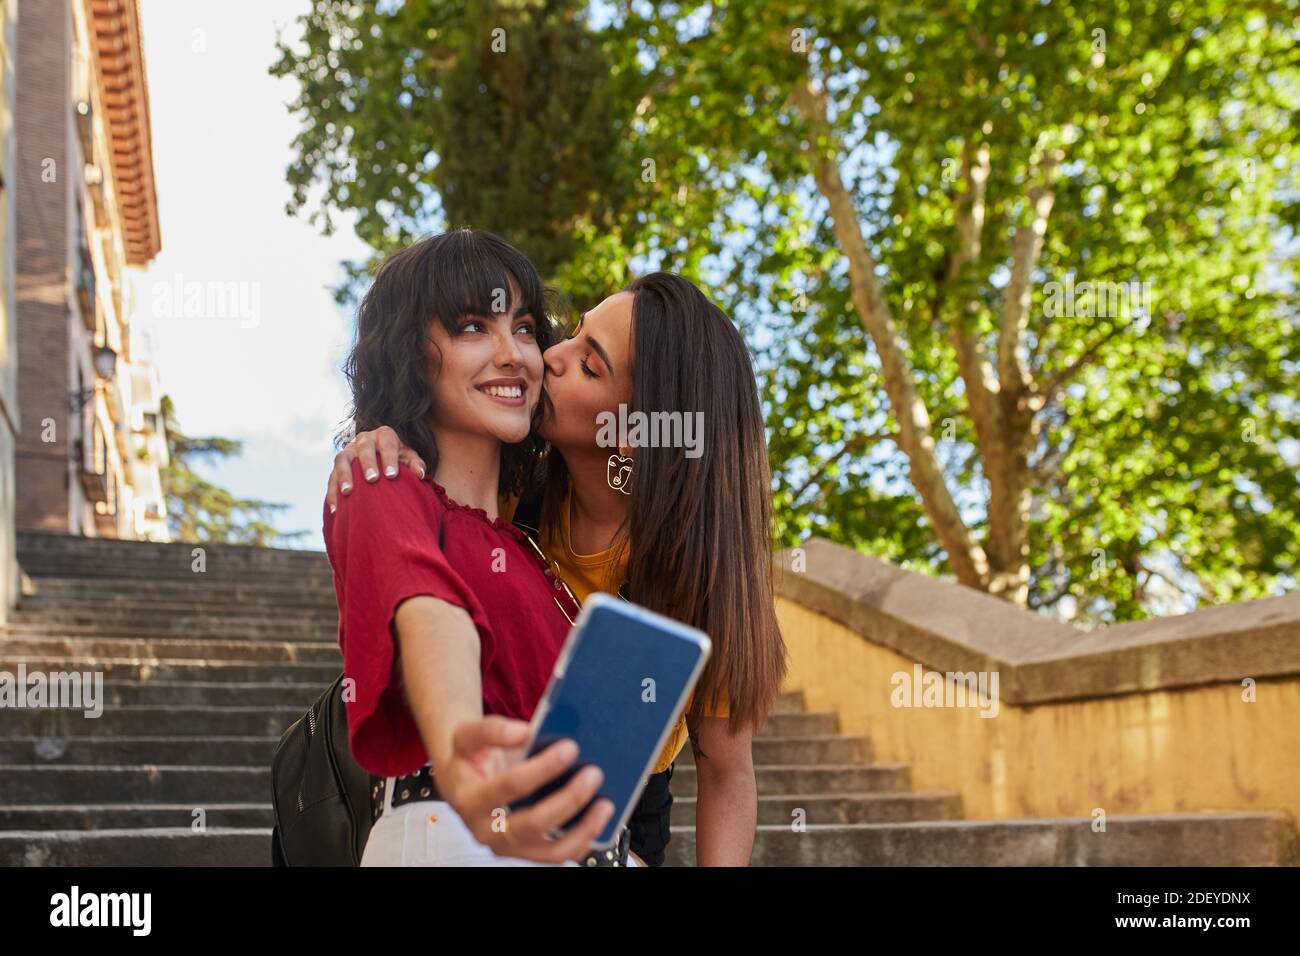 Stock photo of two teenager girls standing stairs and taking a selfie. One of them is kissing the other They are wearing casual cloth and sunglasses. Stock Photo